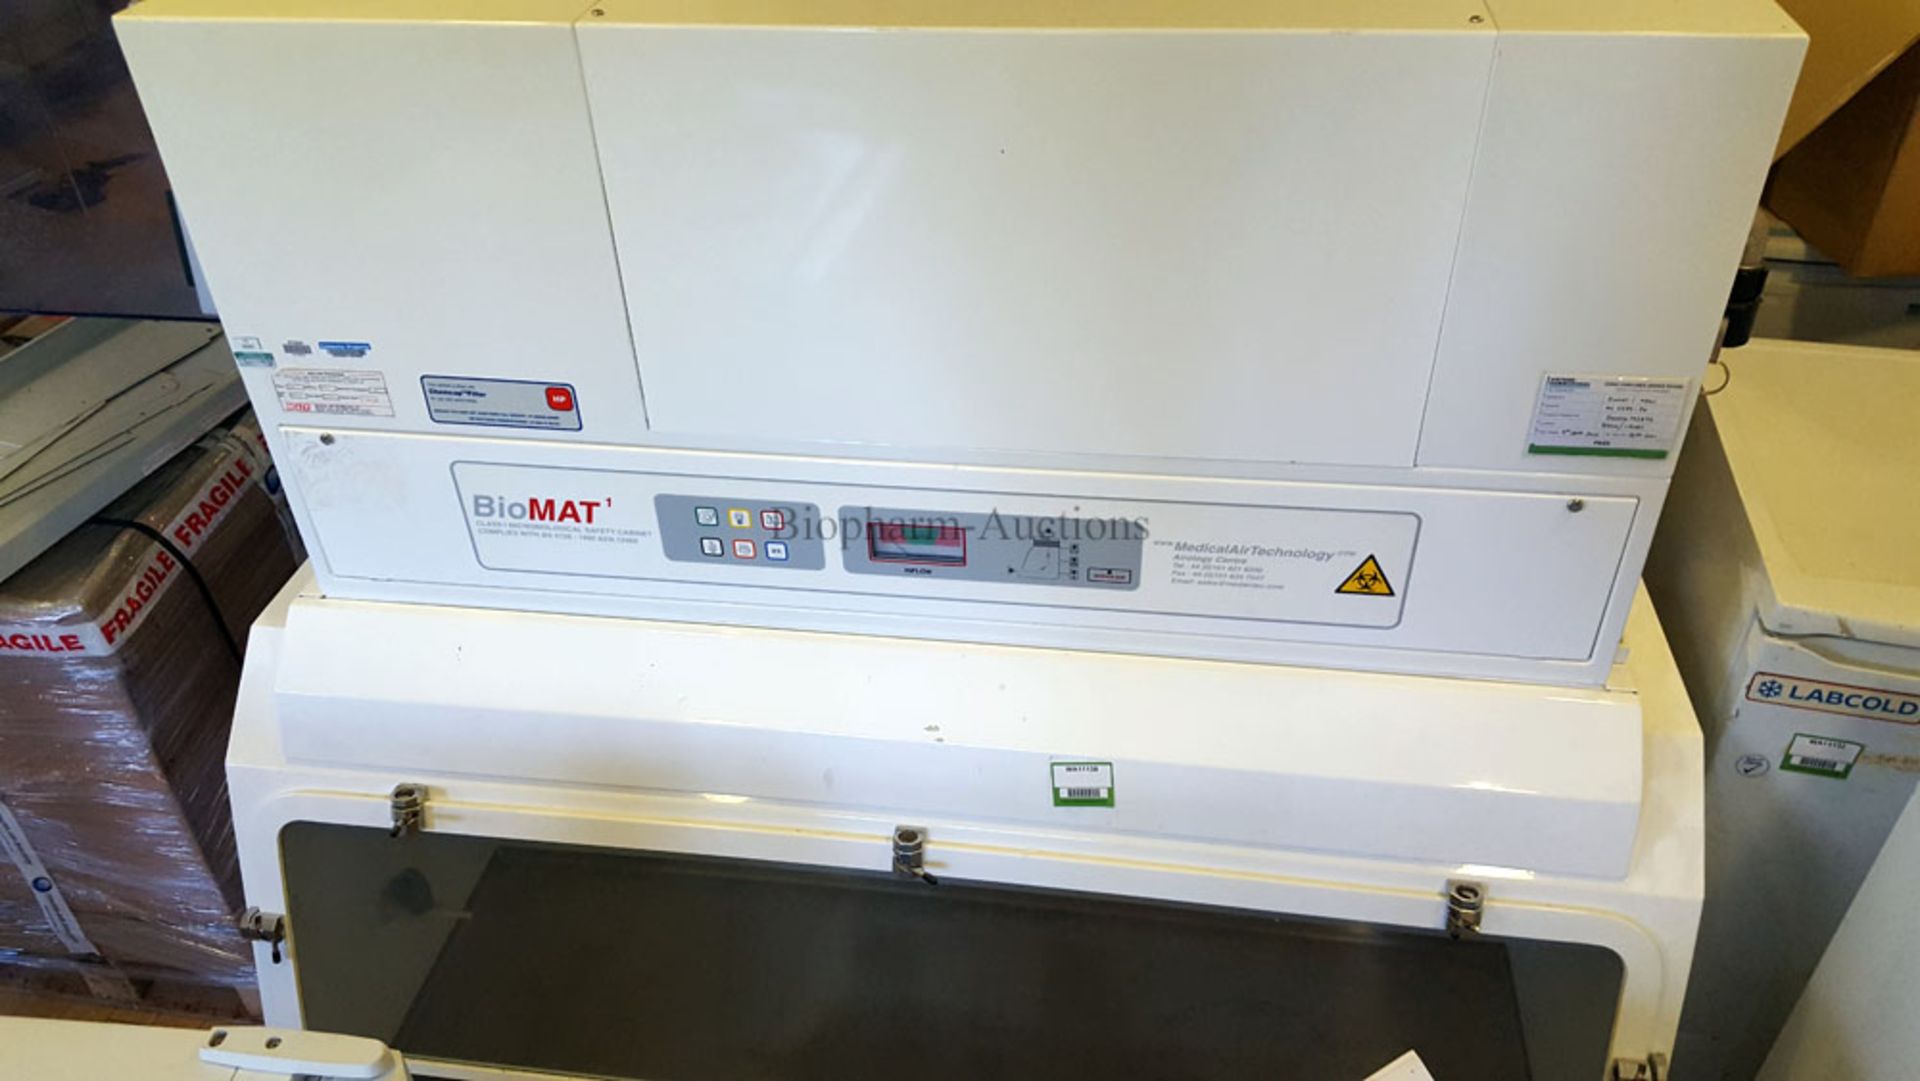 BioMAT Class 1 Microbiological safety cabinet, serial number MC 4789-74 (Ref: WA11138) - Image 6 of 8